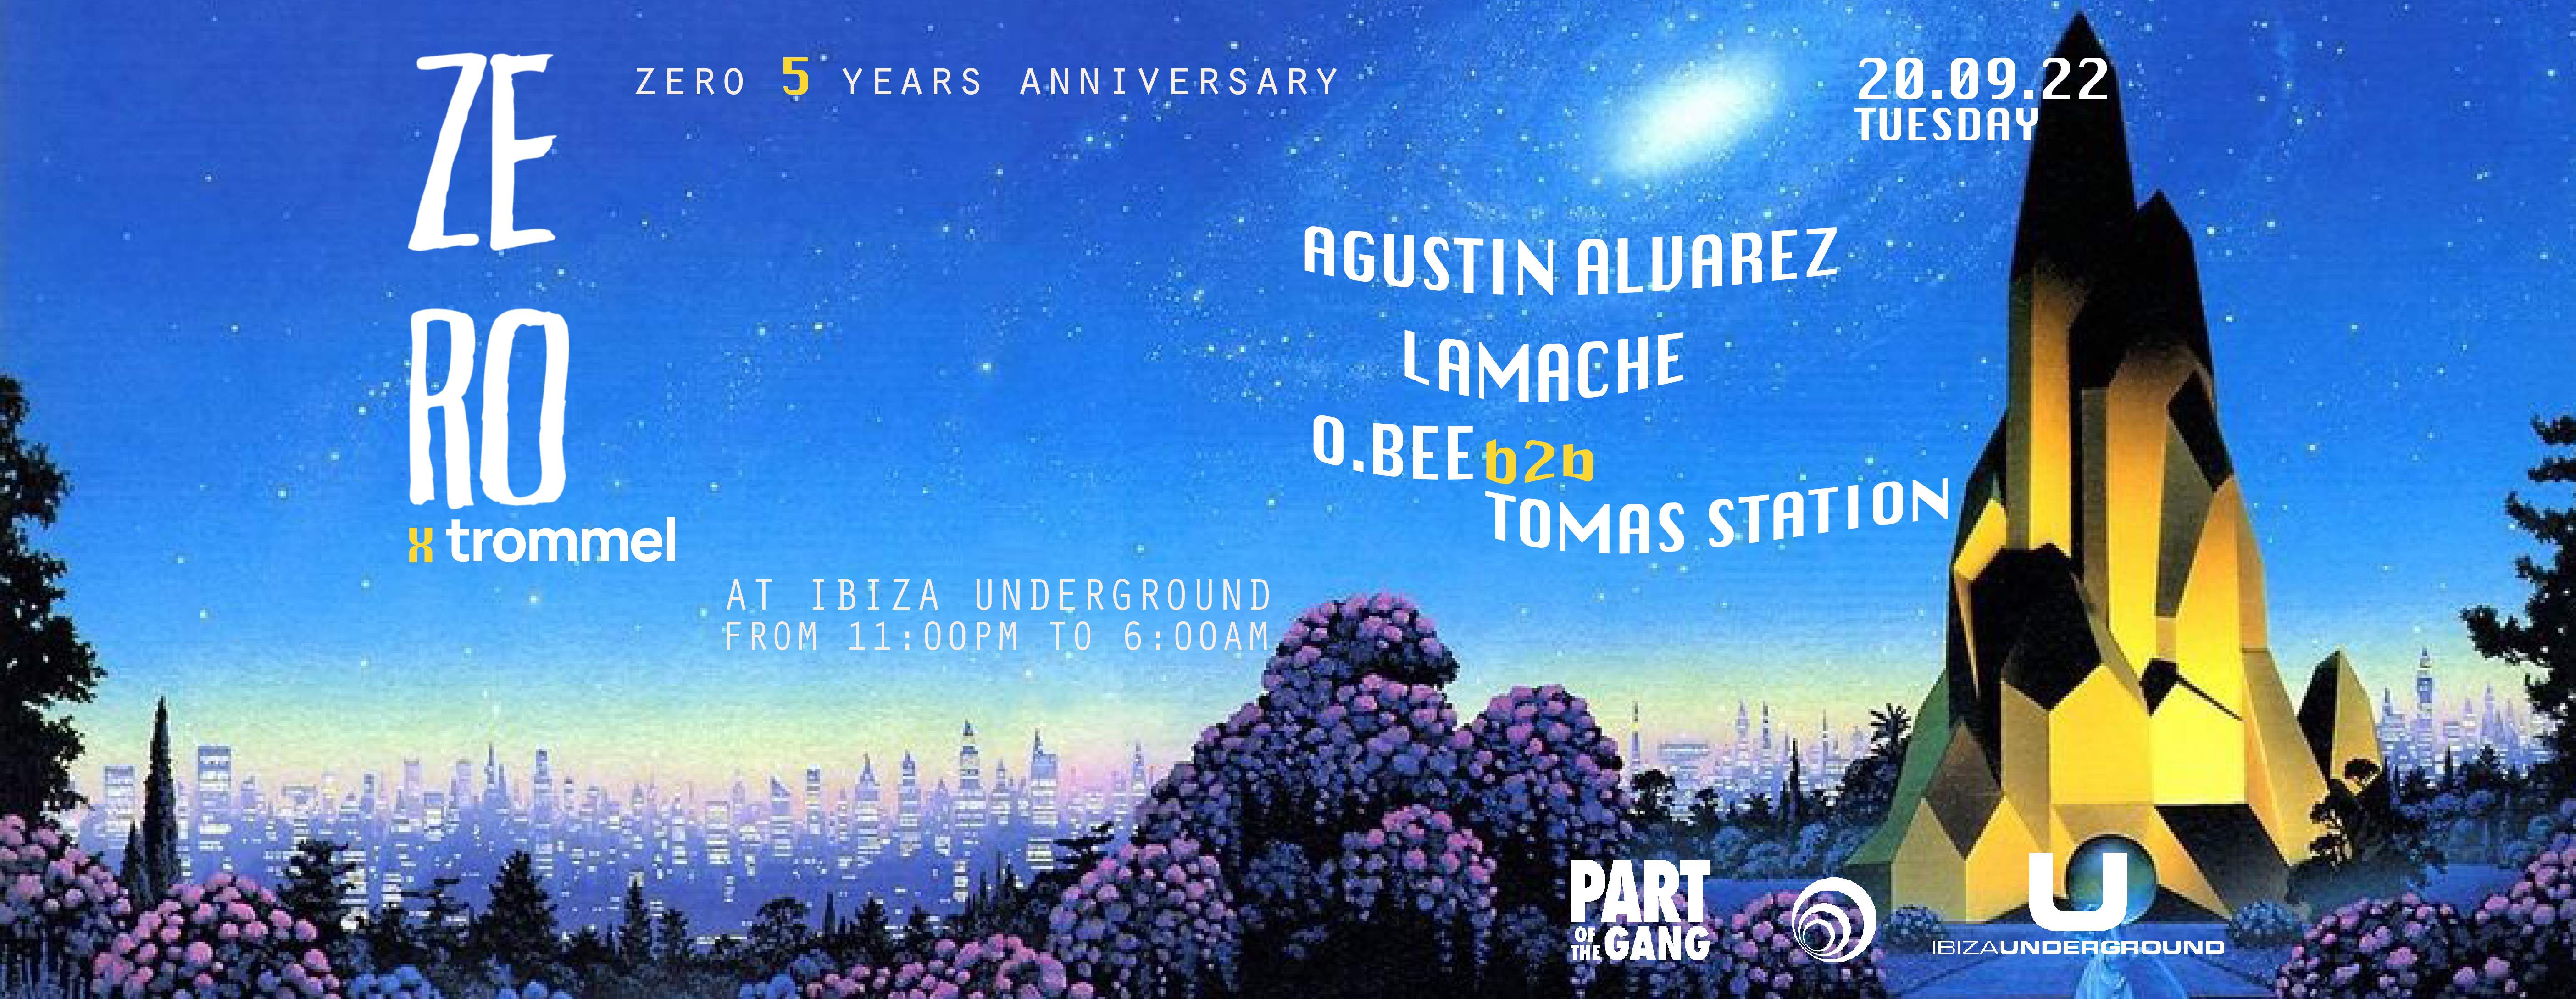 5 years of Zero x Trommel x Part Of The Gang x Cuts & Wines with Lamache, O.BEE & Tomas Station - フライヤー表